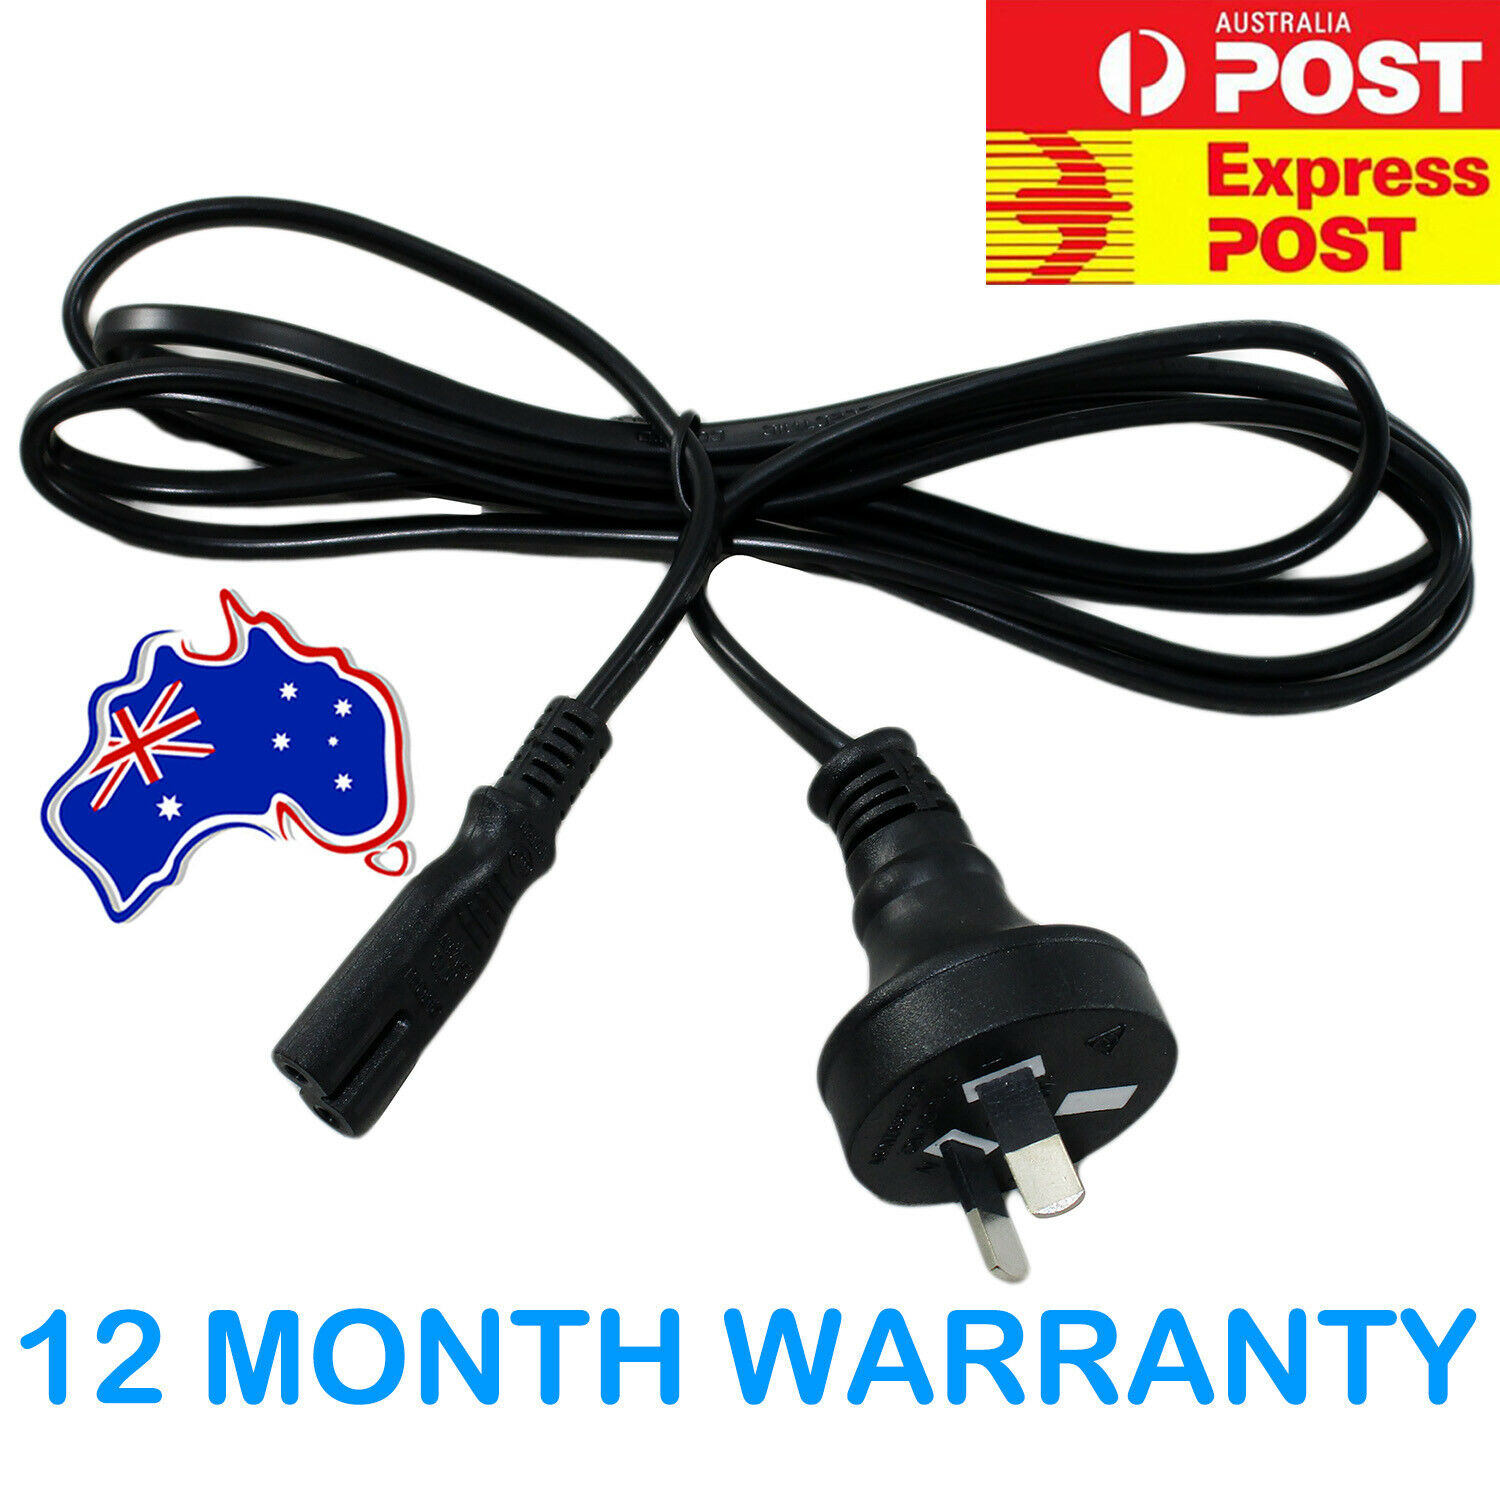 POWER CABLE/LEAD Replacement for Original Classic Microsoft XBox AU Plug Compatible Model: For Microsoft Xbox Platfo - Click Image to Close